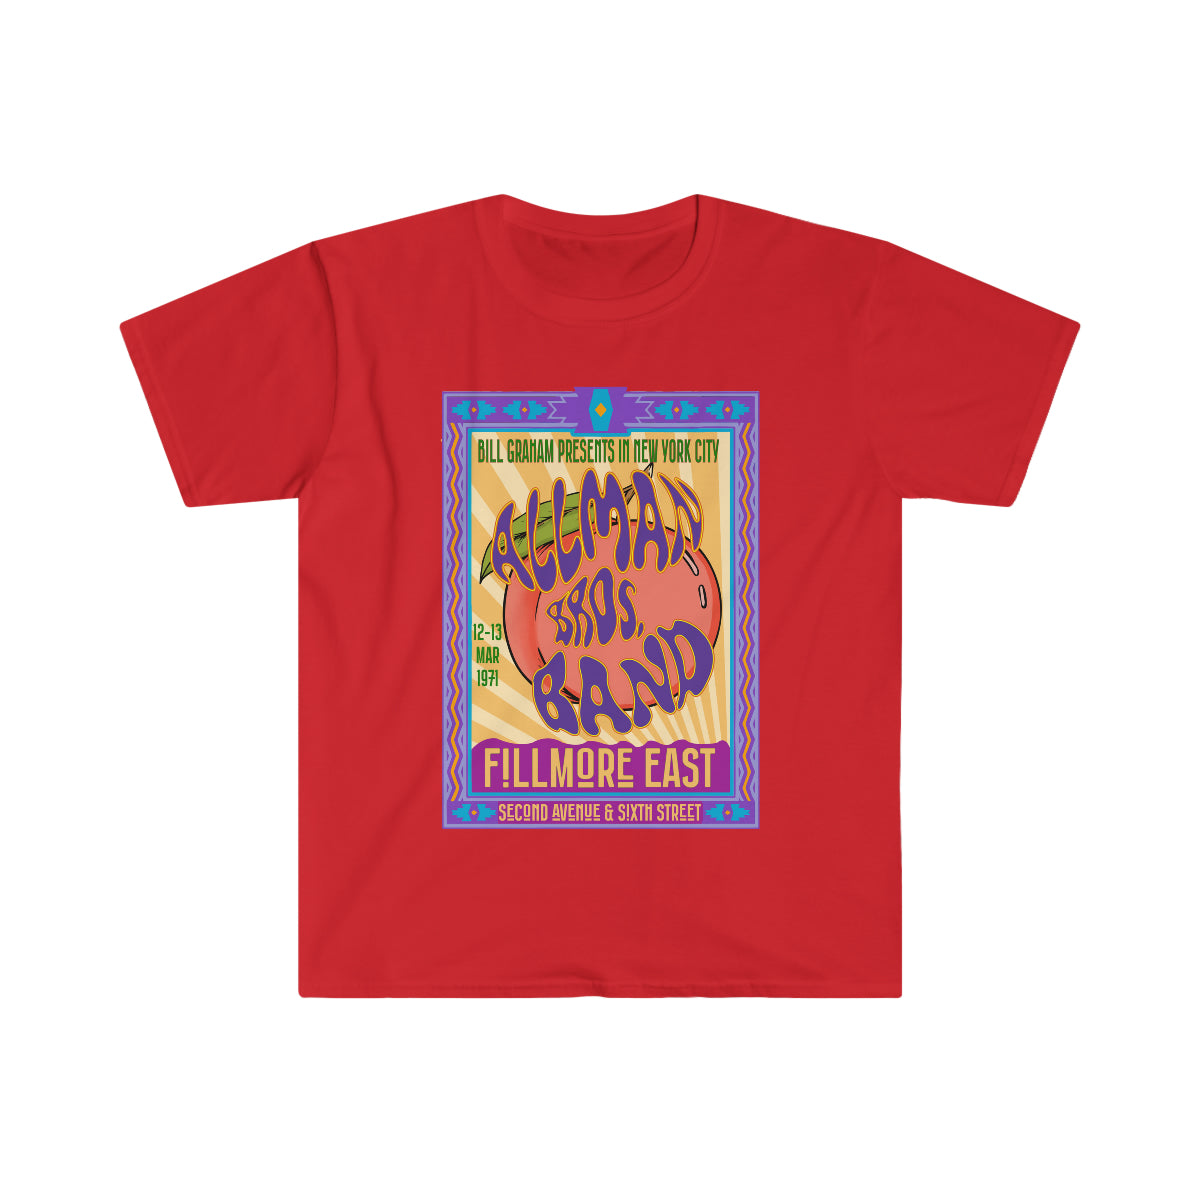 Allman Brothers at the Fillmore East - Unisex T-Shirt